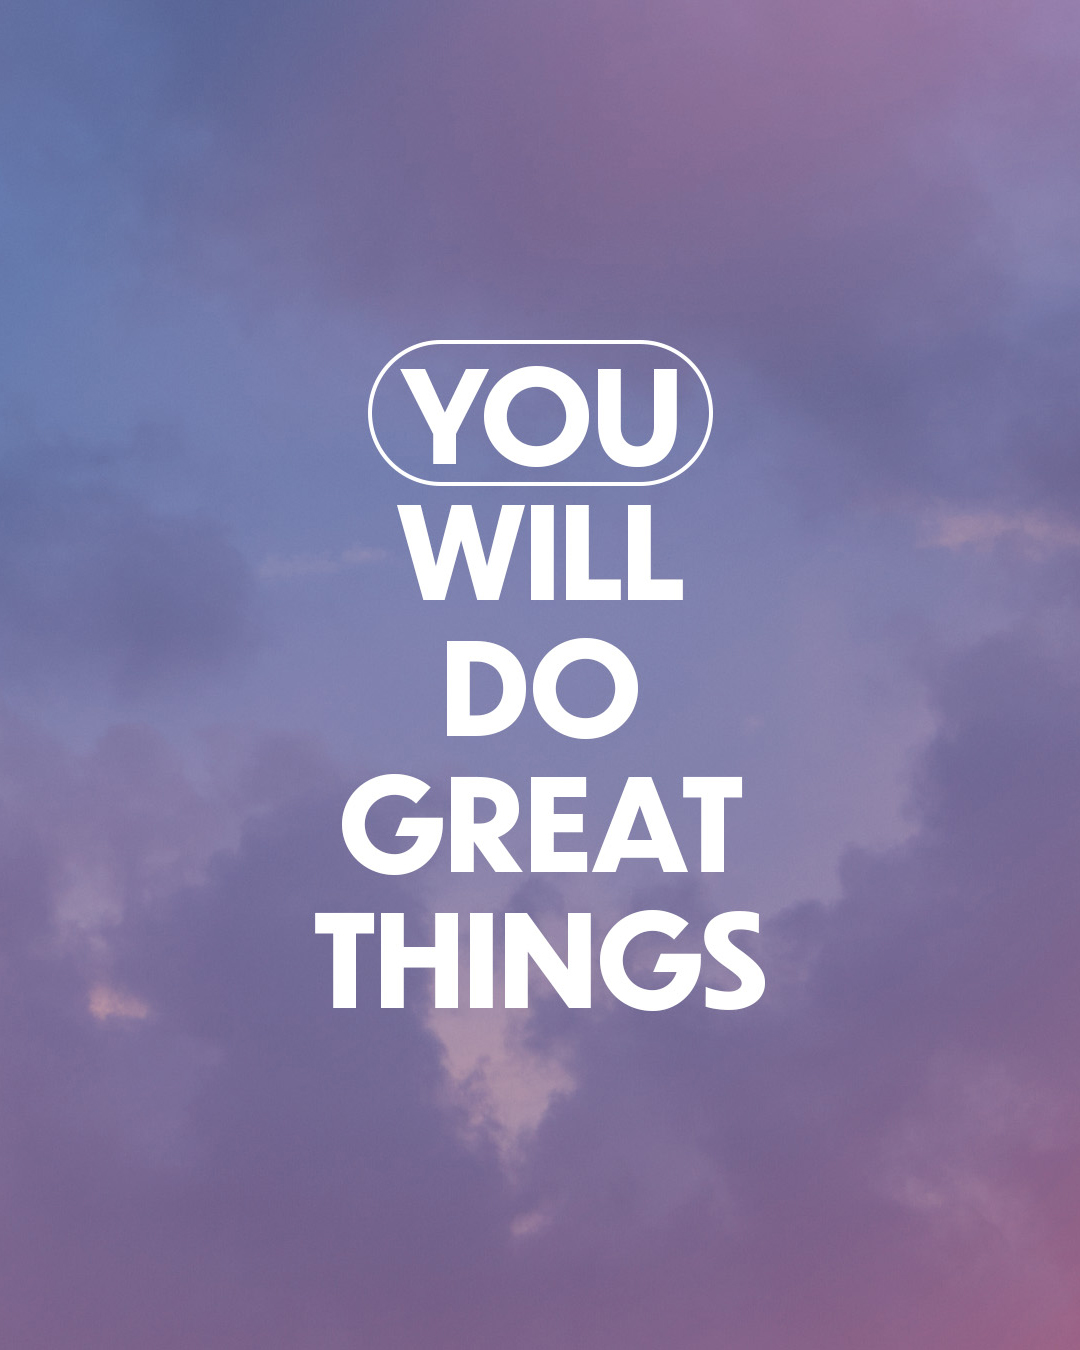 You will do great things